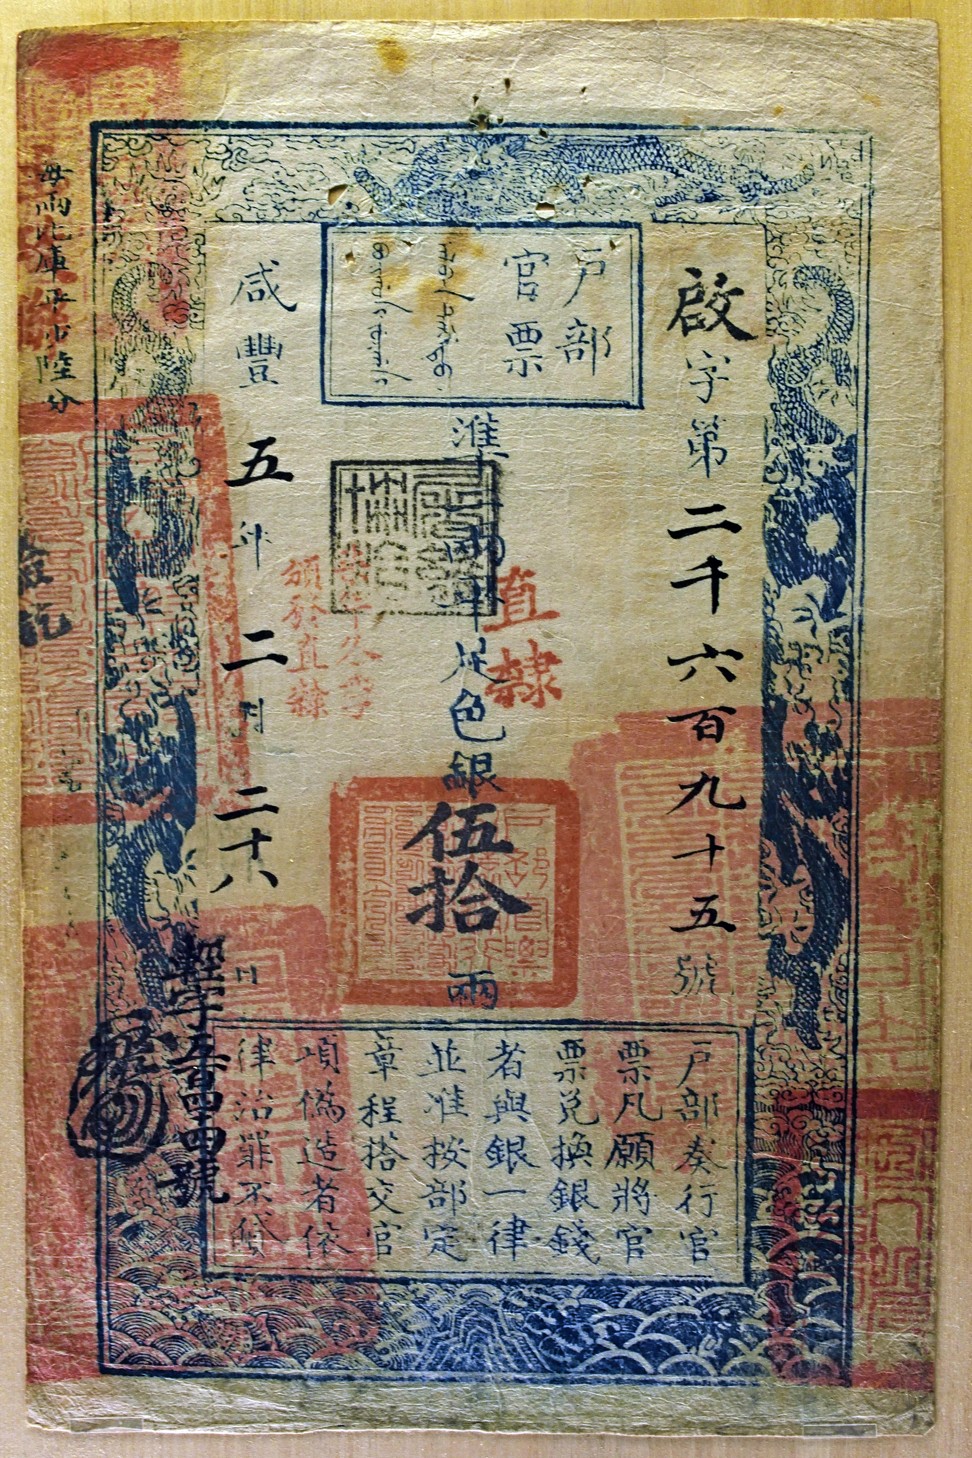 Paper money used during the Qing dynasty (1644-1911). Photo: Alamy